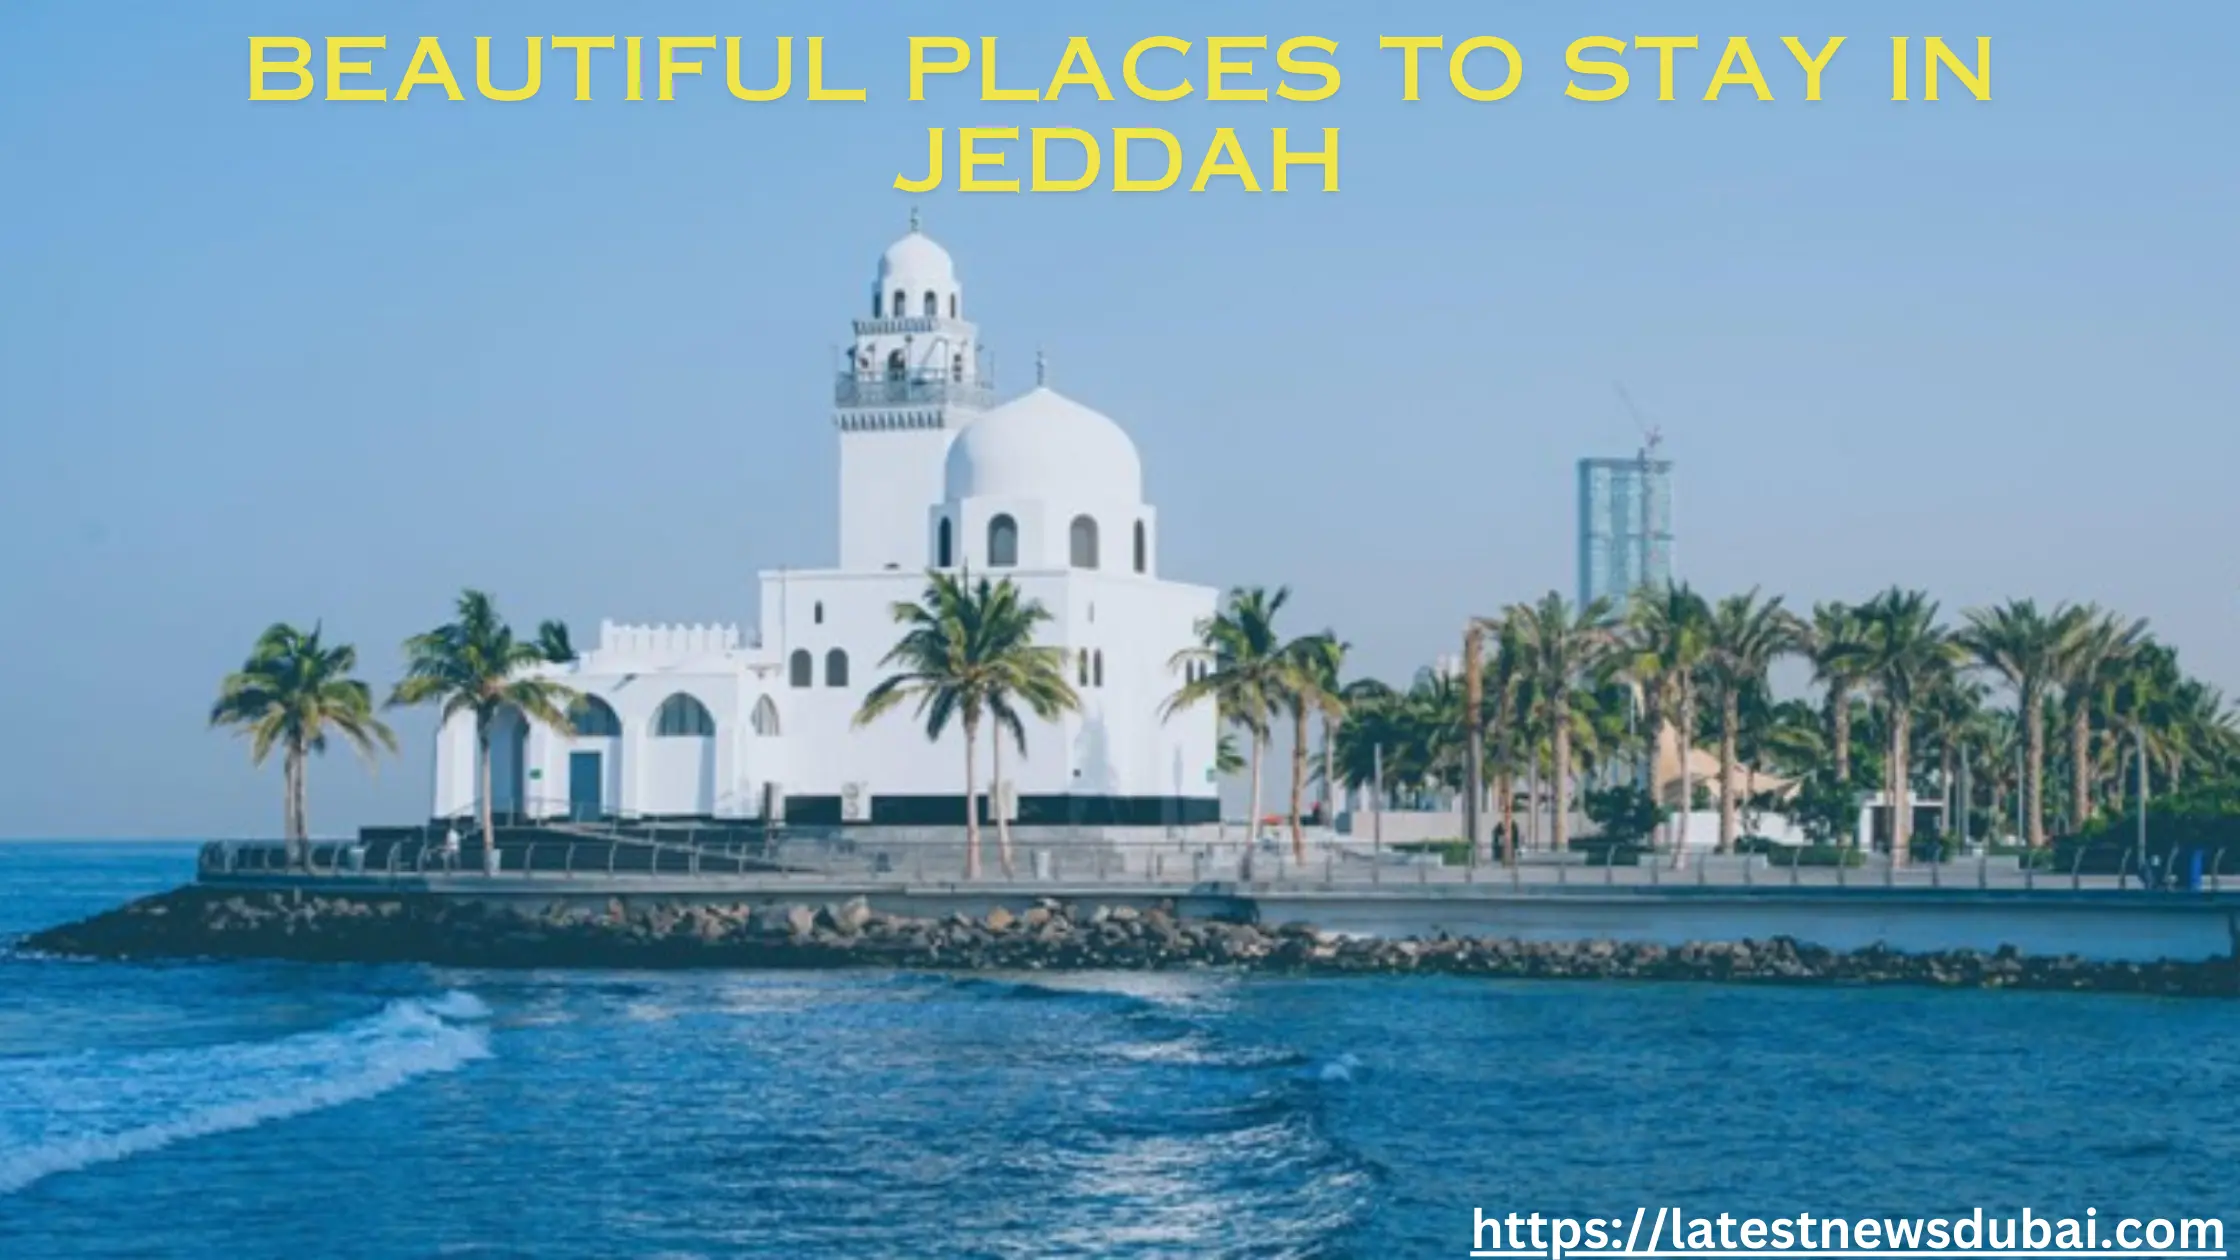 Check out the beautiful places to stay in Jeddah